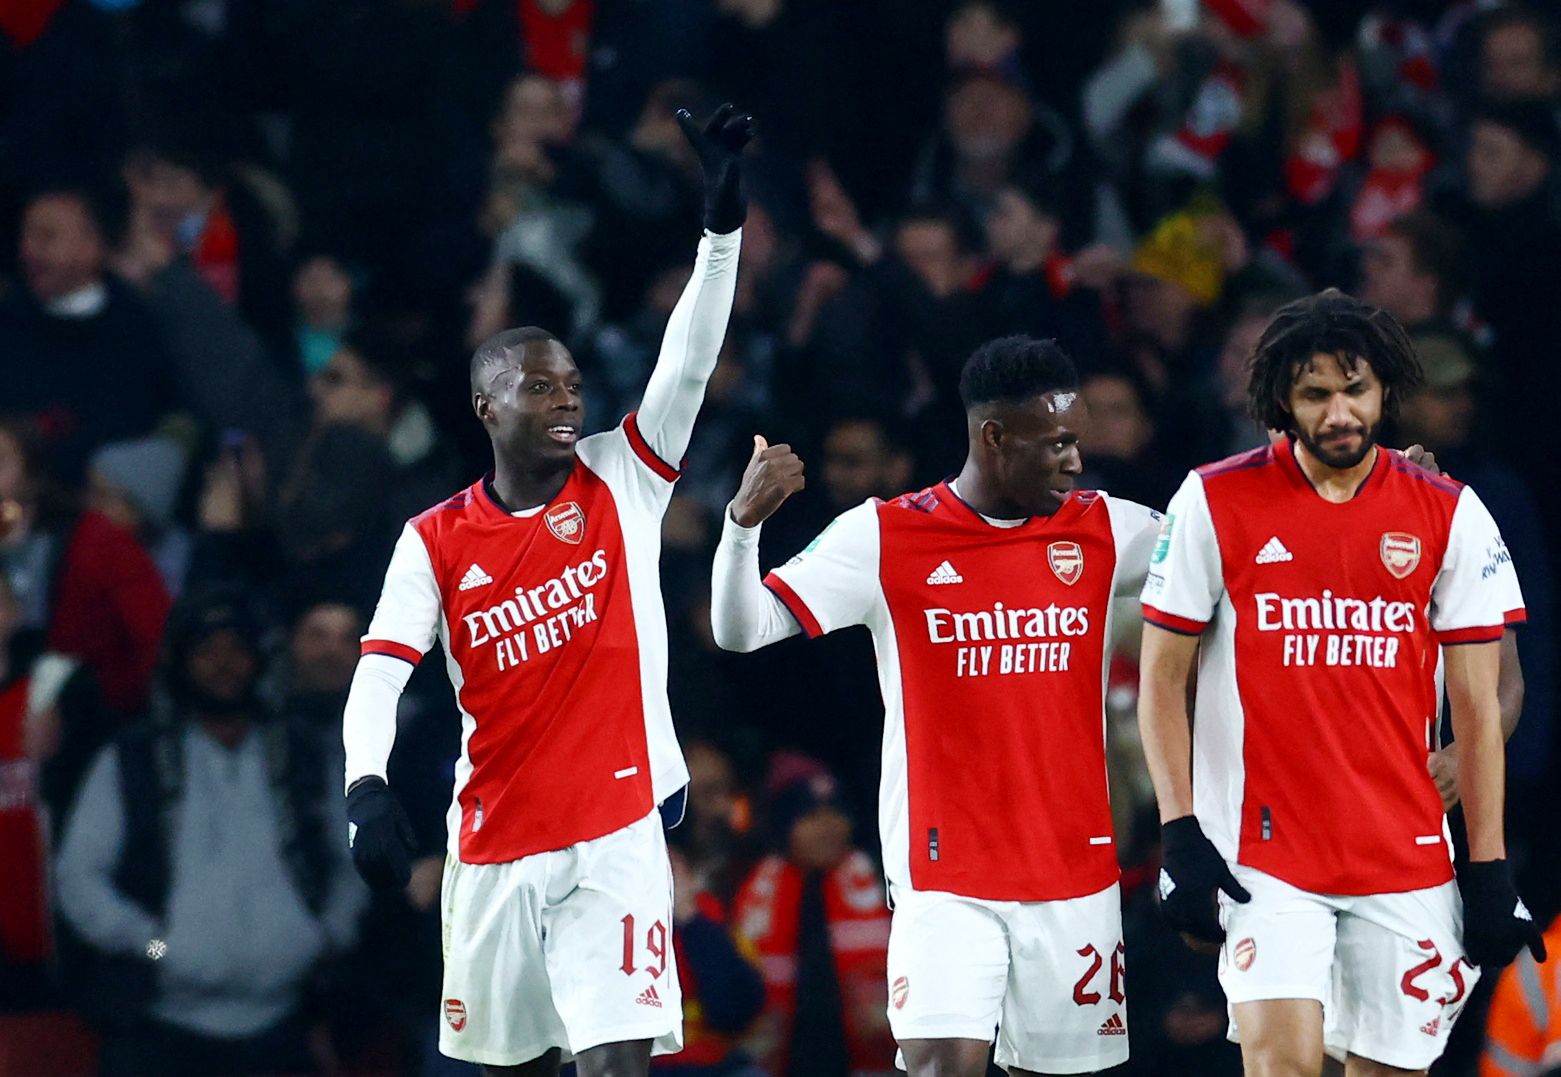 Soccer Football - Carabao Cup - Quarter Final - Arsenal v Sunderland - Emirates Stadium, London, Britain - December 21, 2021 Arsenal's Nicolas Pepe celebrates scoring their second goal with Folarin Balogun and Mohamed Elneny REUTERS/David Klein EDITORIAL USE ONLY. No use with unauthorized audio, video, data, fixture lists, club/league logos or 'live' services. Online in-match use limited to 75 images, no video emulation. No use in betting, games or single club /league/player publications.  Pleas